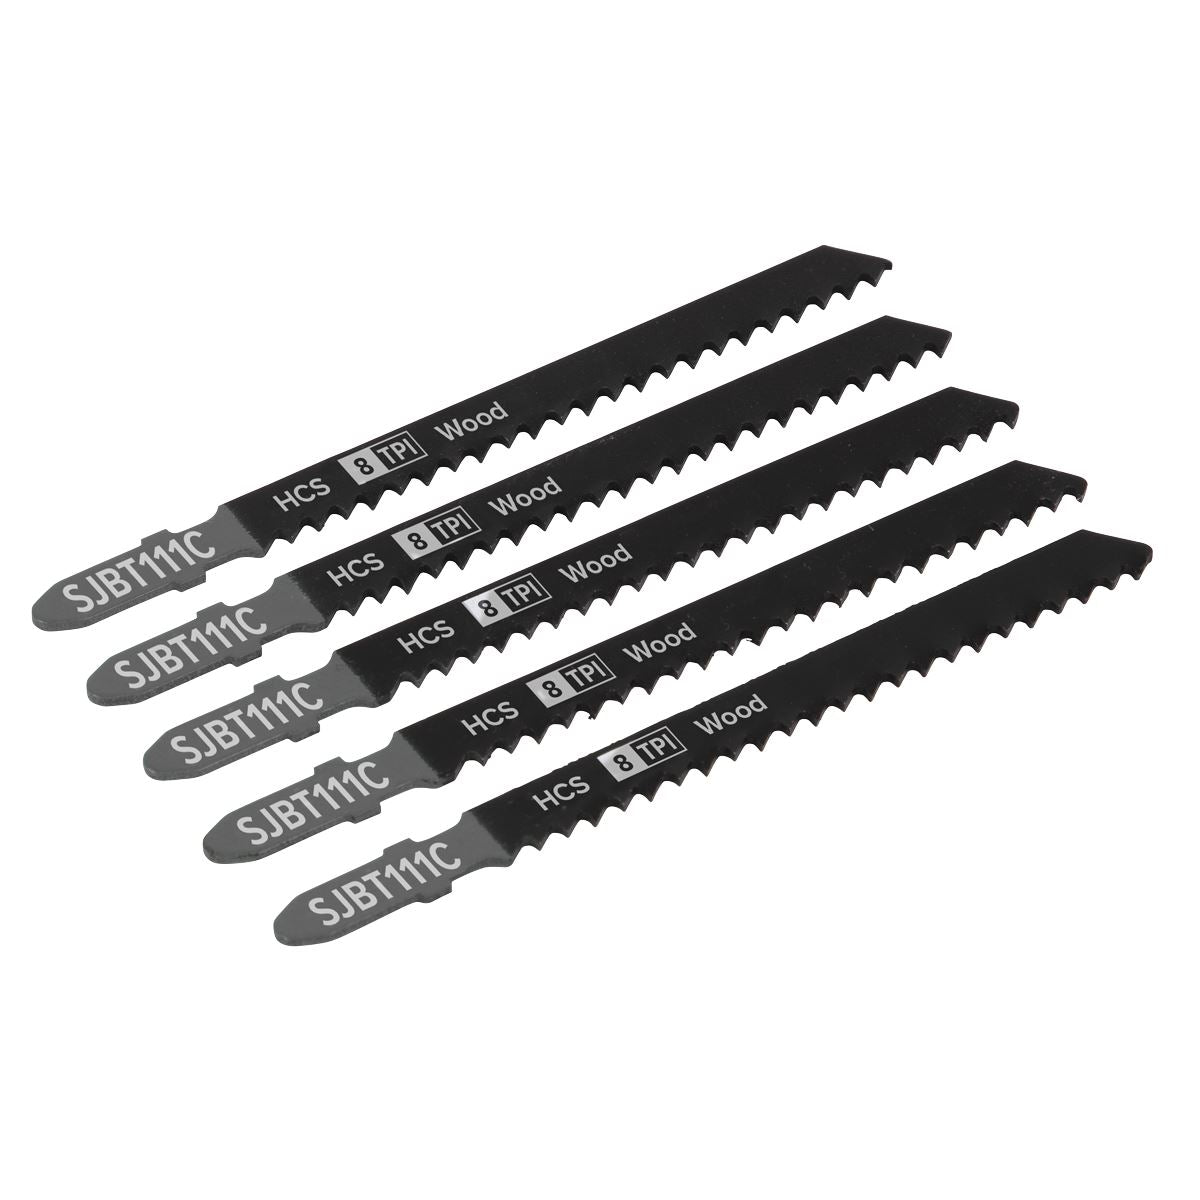 Sealey Jigsaw Blade General Wood 100mm 8tpi - Pack of 5